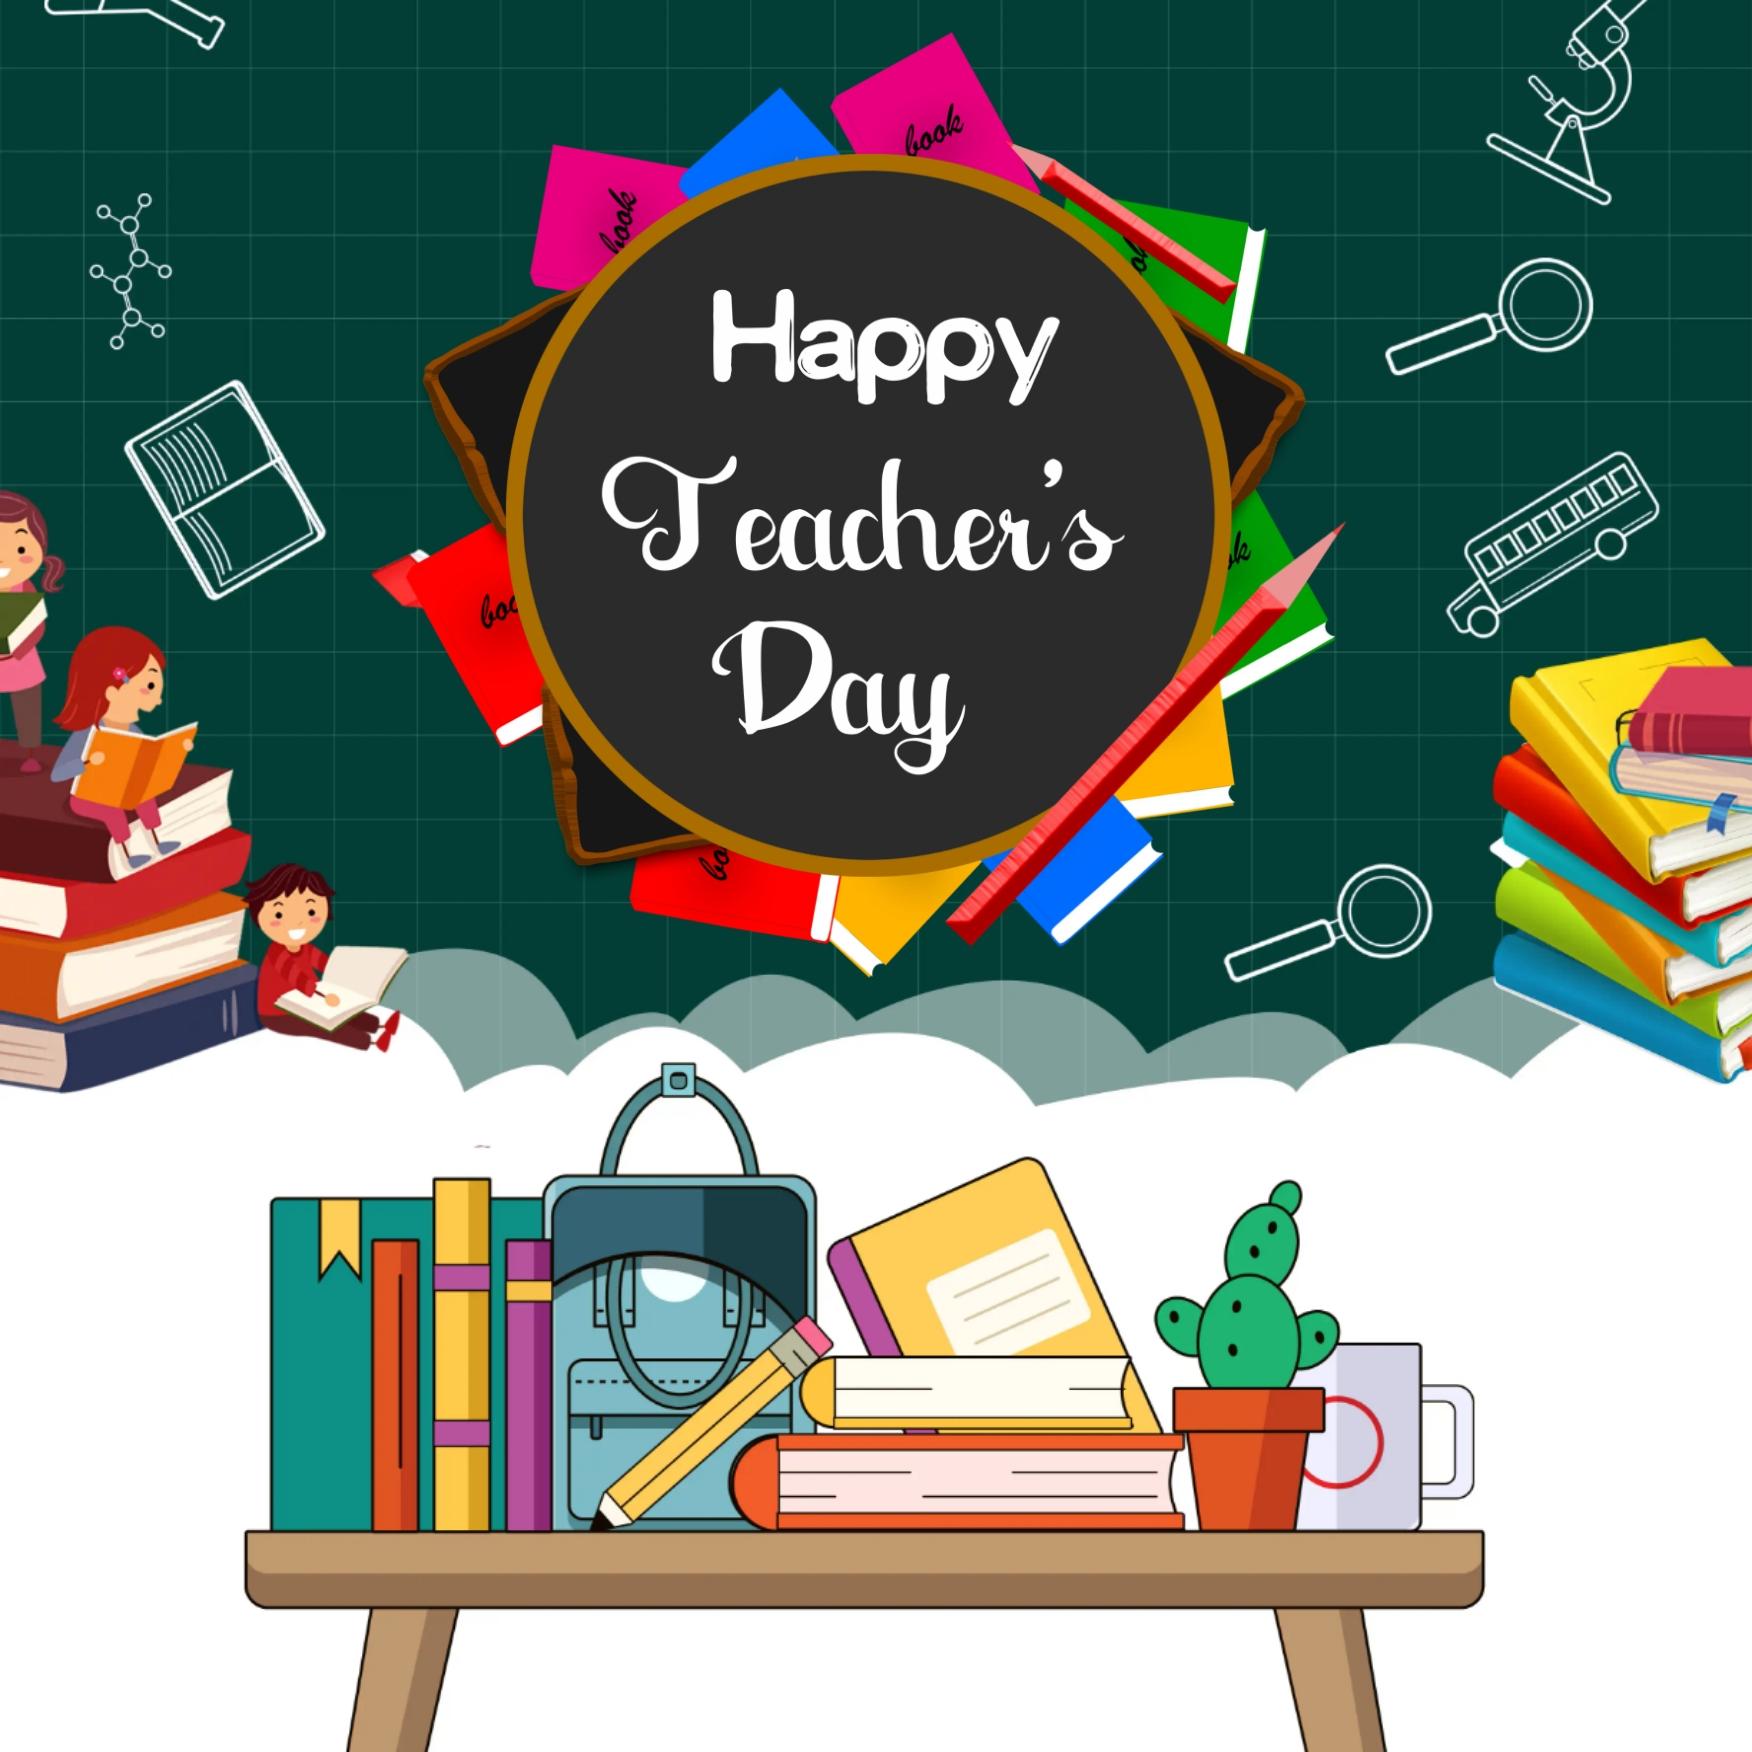 Happy Teachers Day Card Images